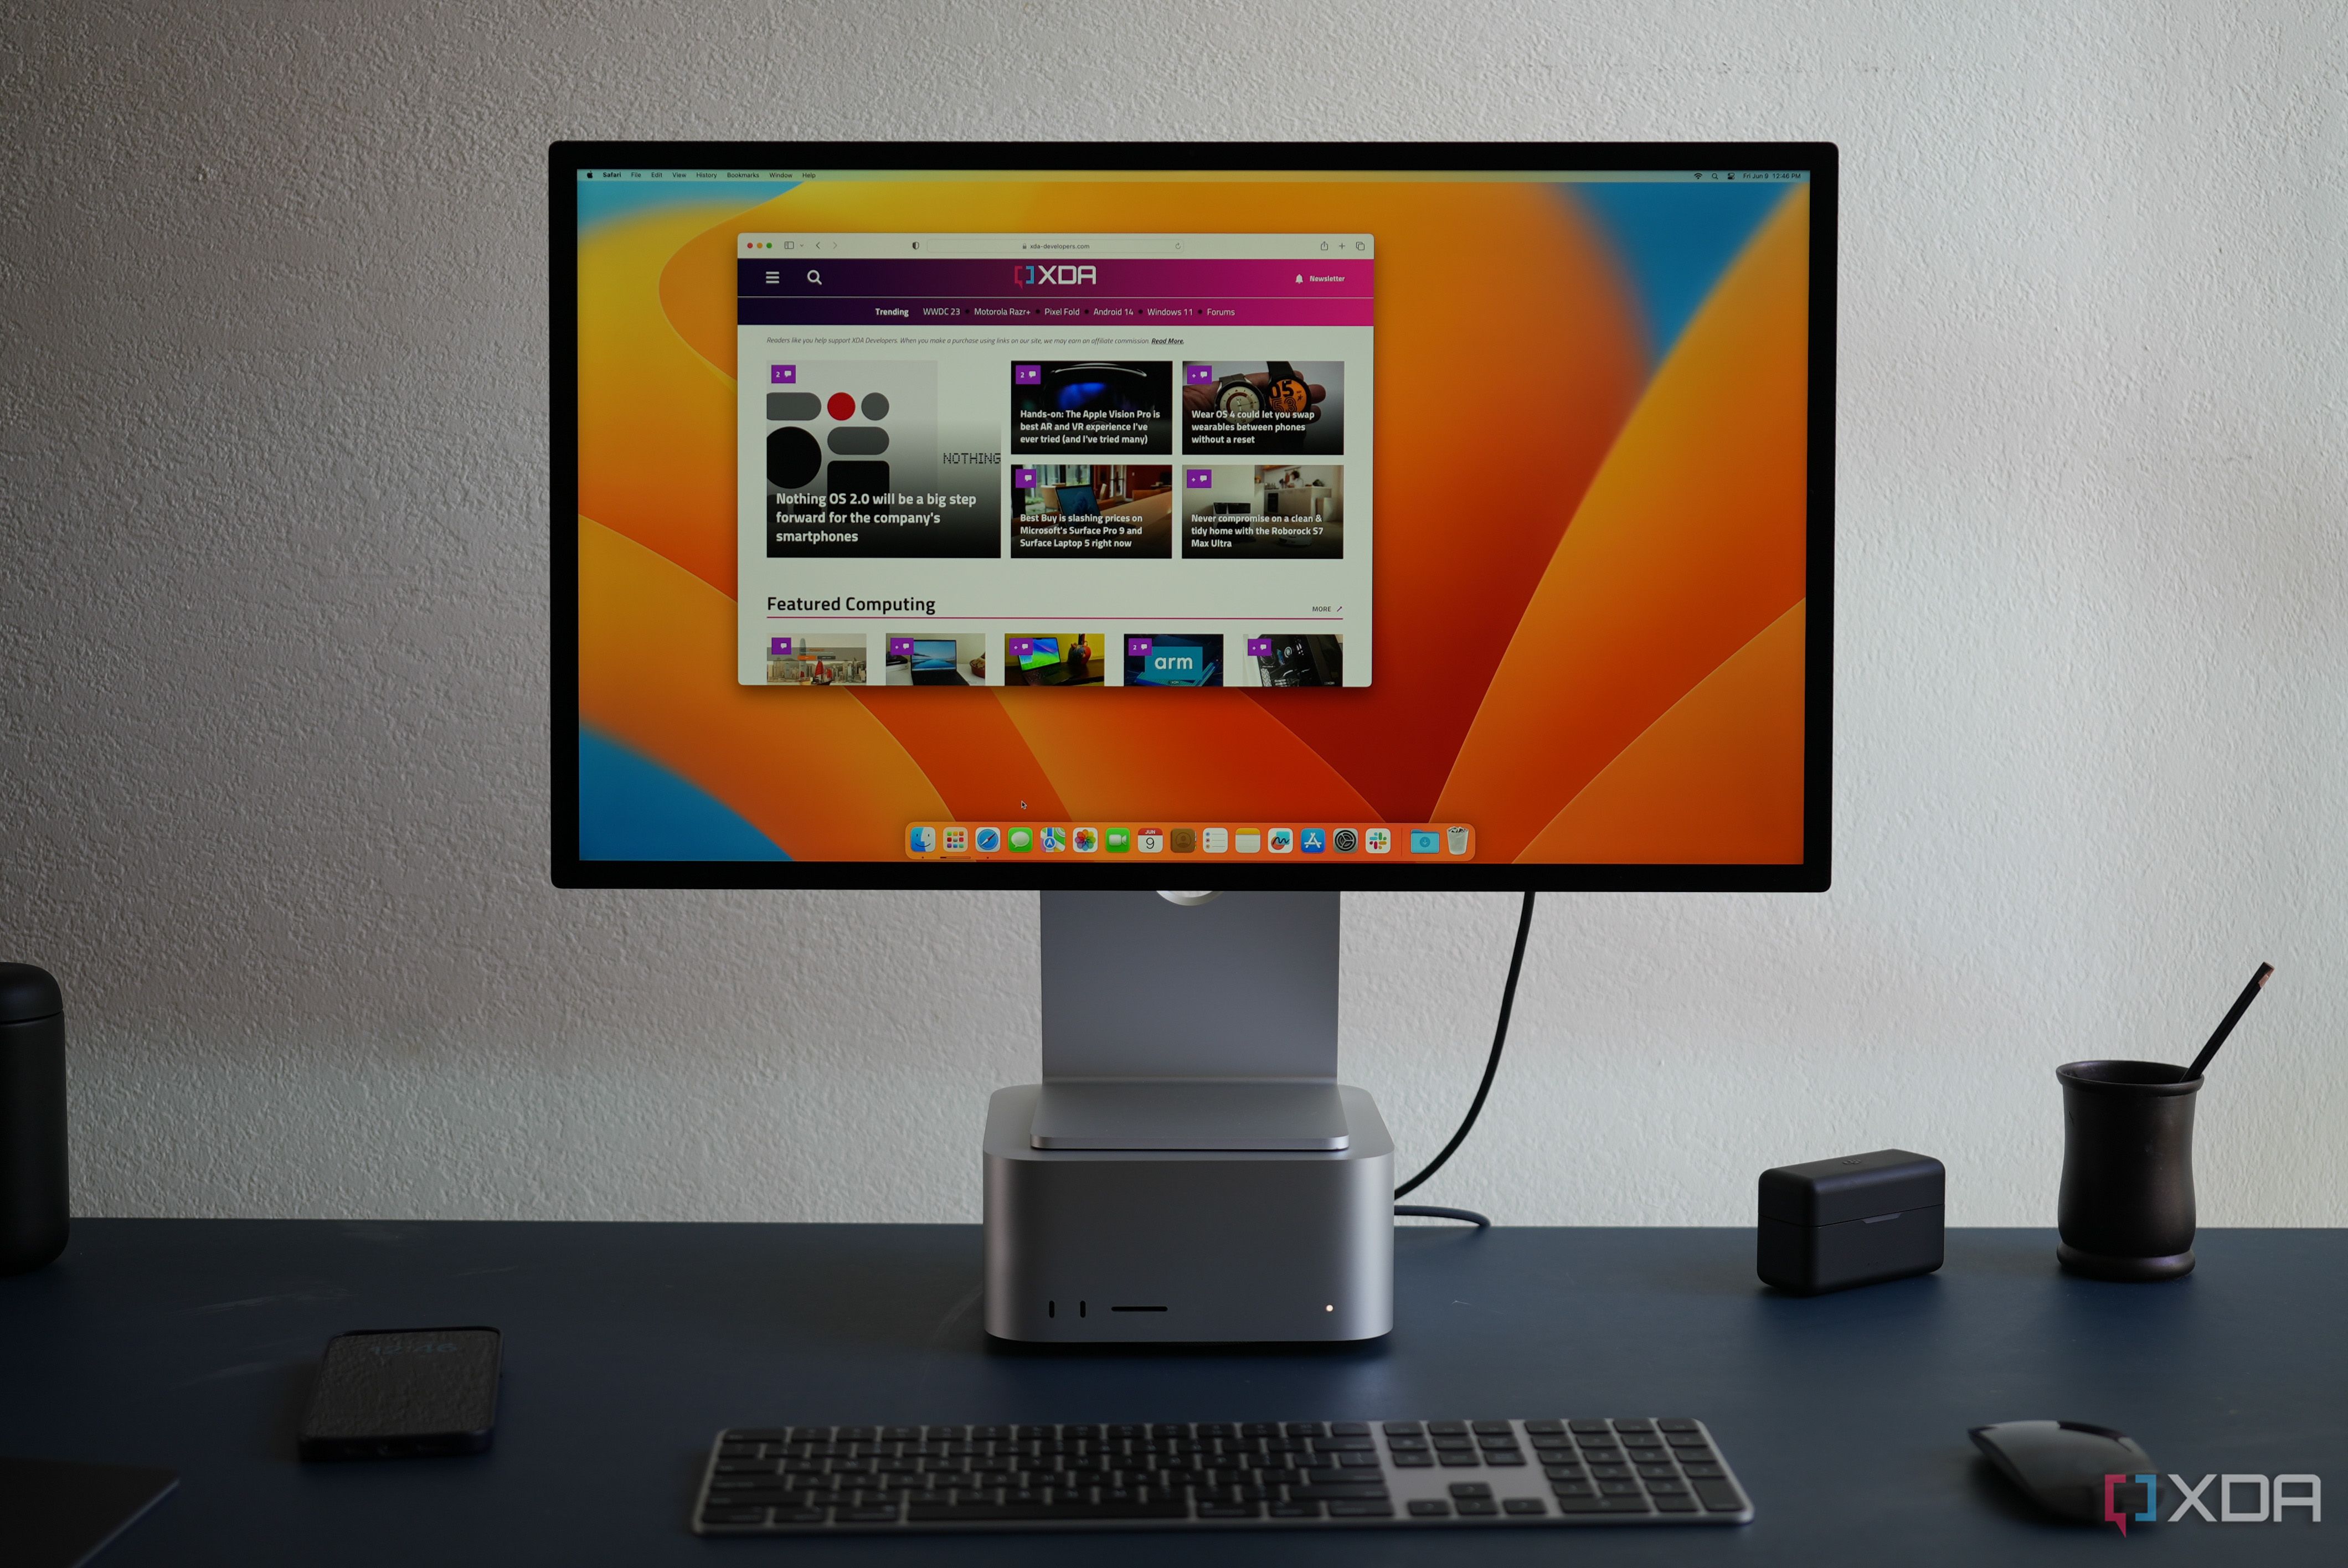 Apple Studio Display will work fine with your Windows PC